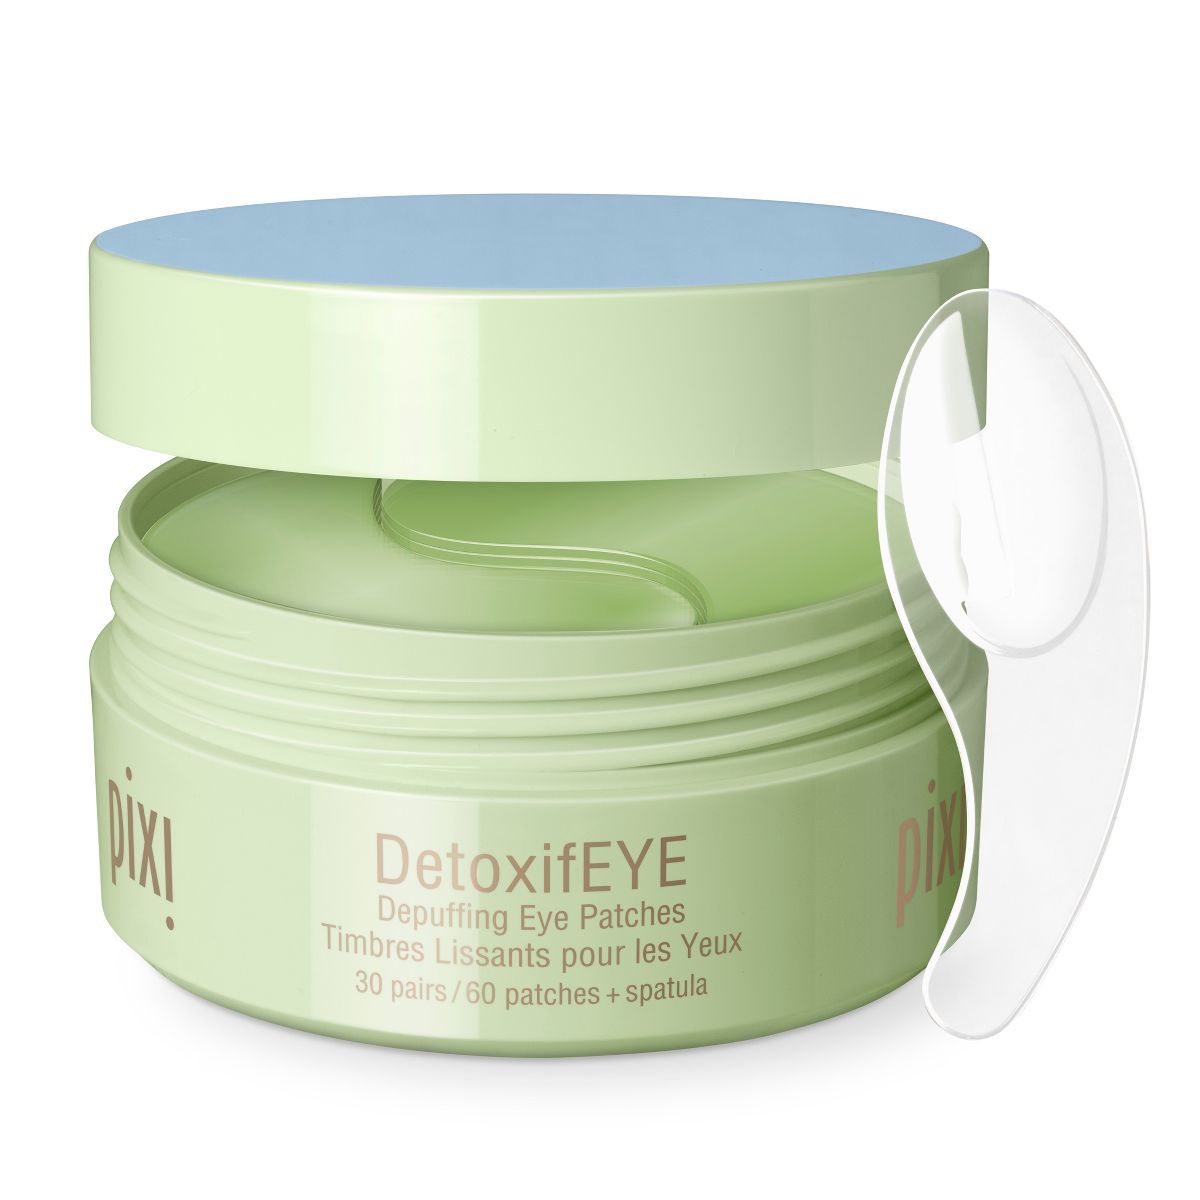 Pixi DetoxifEYE Hydrating and Depuffing Eye Patches with Caffeine and Cucumber - 60ct | Target